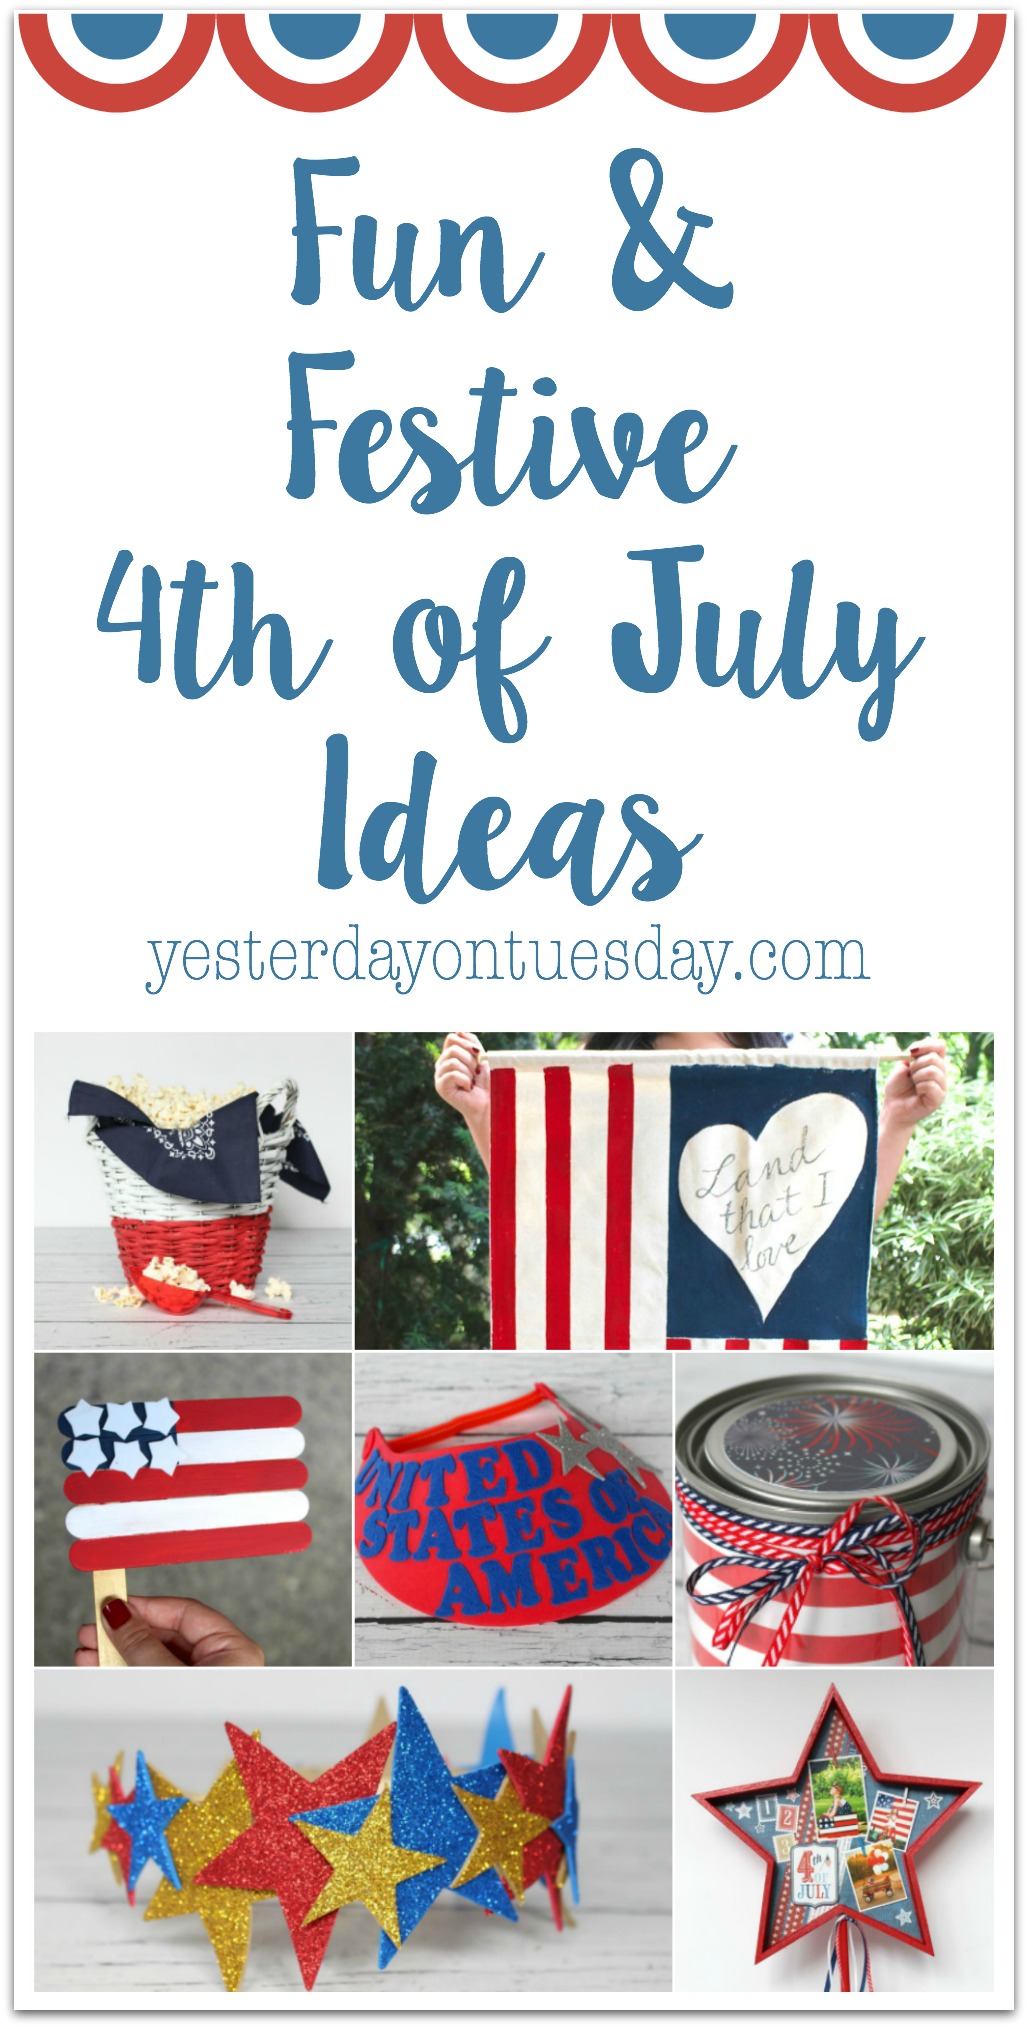 Fun and Festive 4th of July Ideas